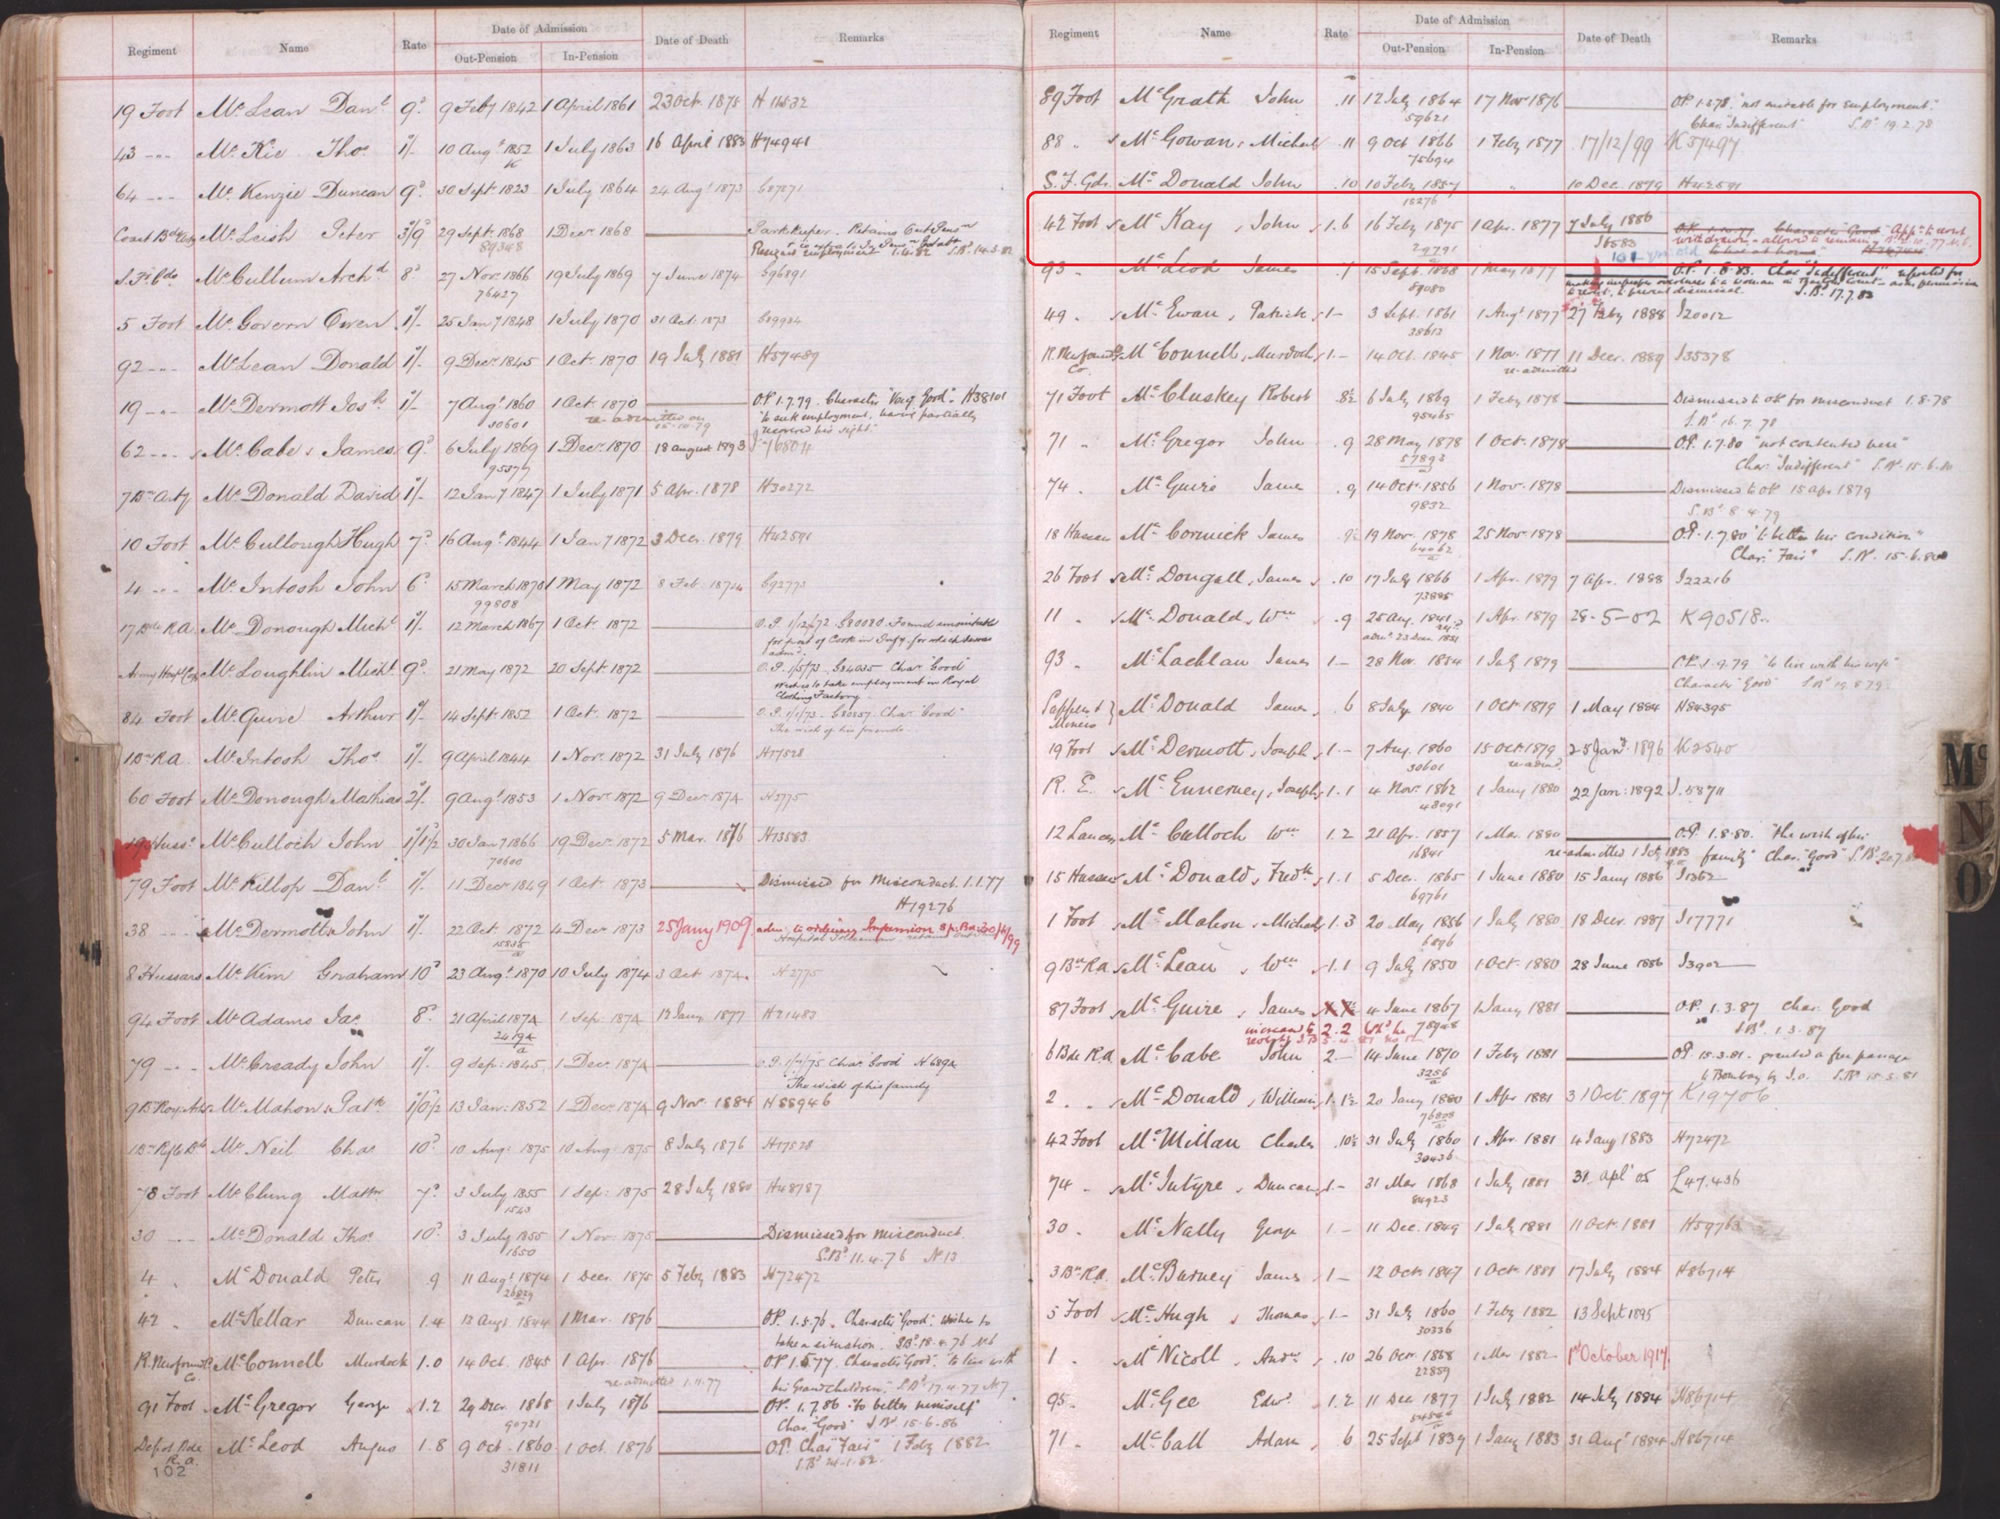 In Pensioners - Index of Admissions to the Royal Hospital Chelsea noting John McKay's death aged 101